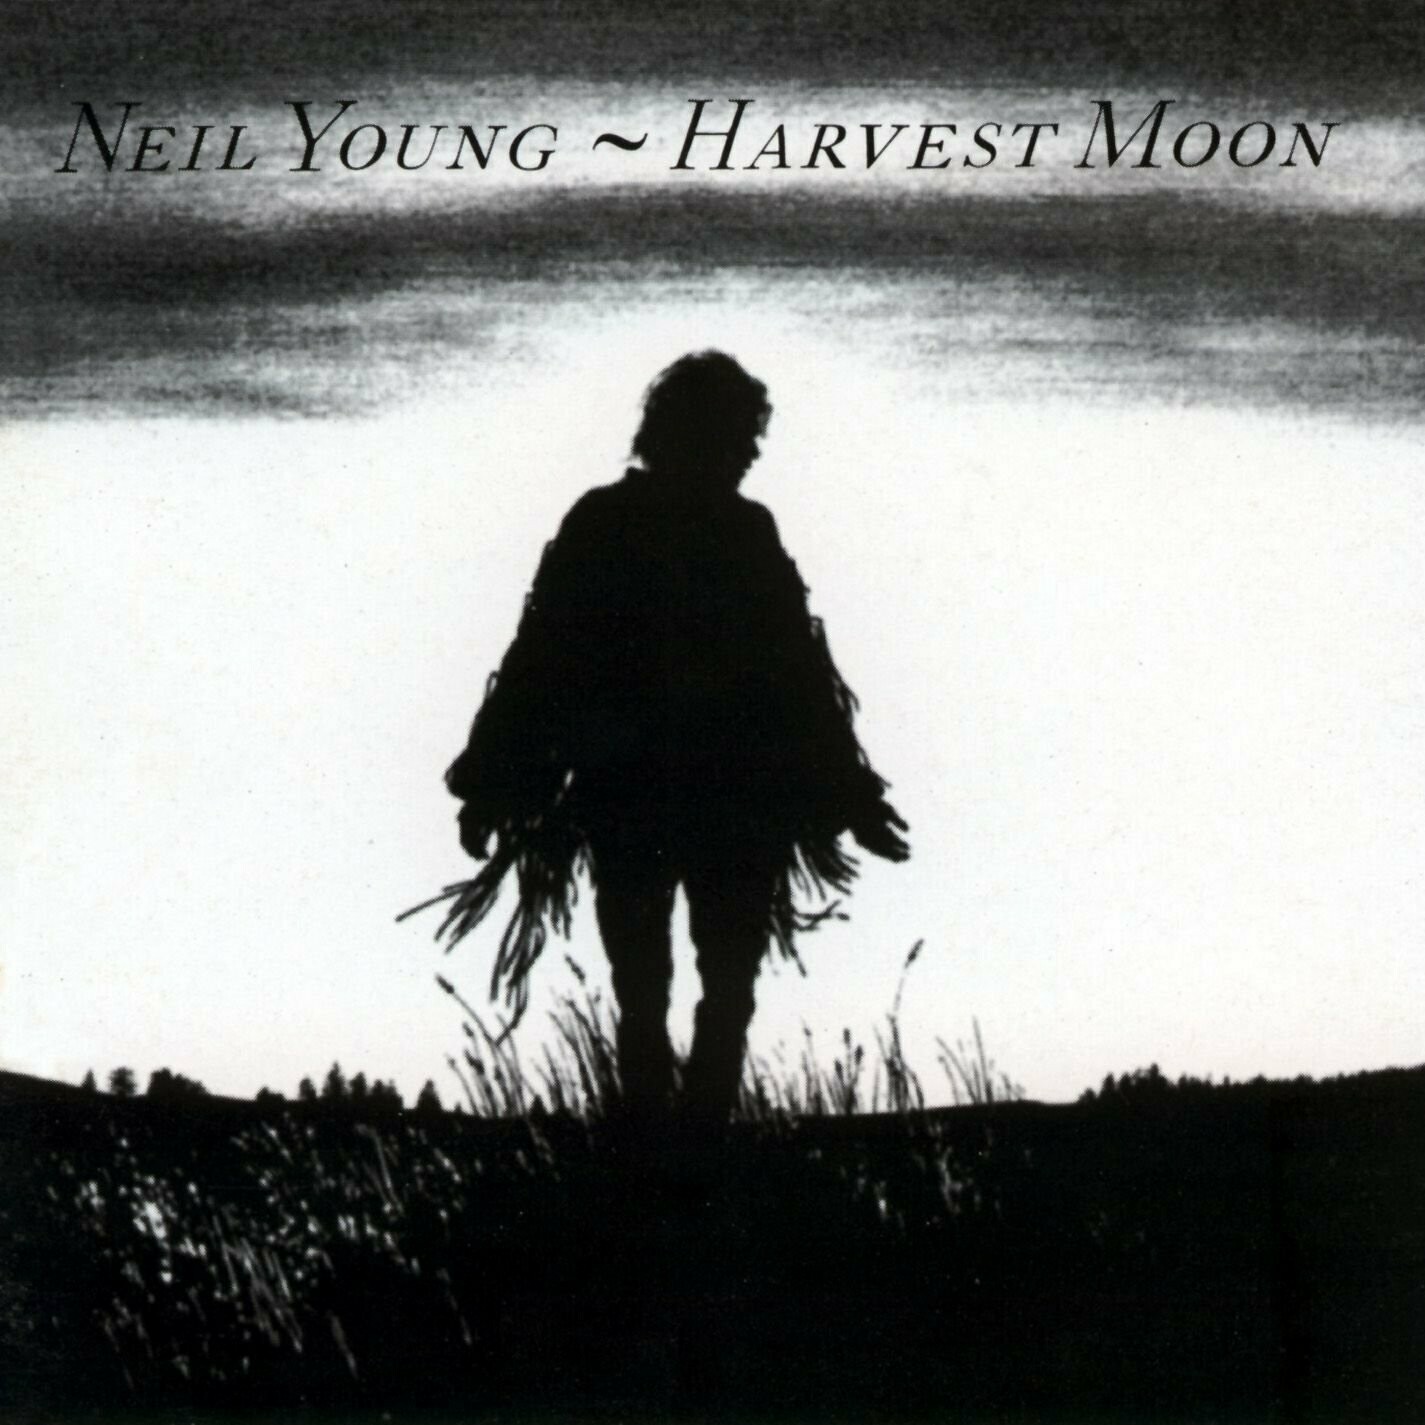 Neil Young "Harvest Moon"